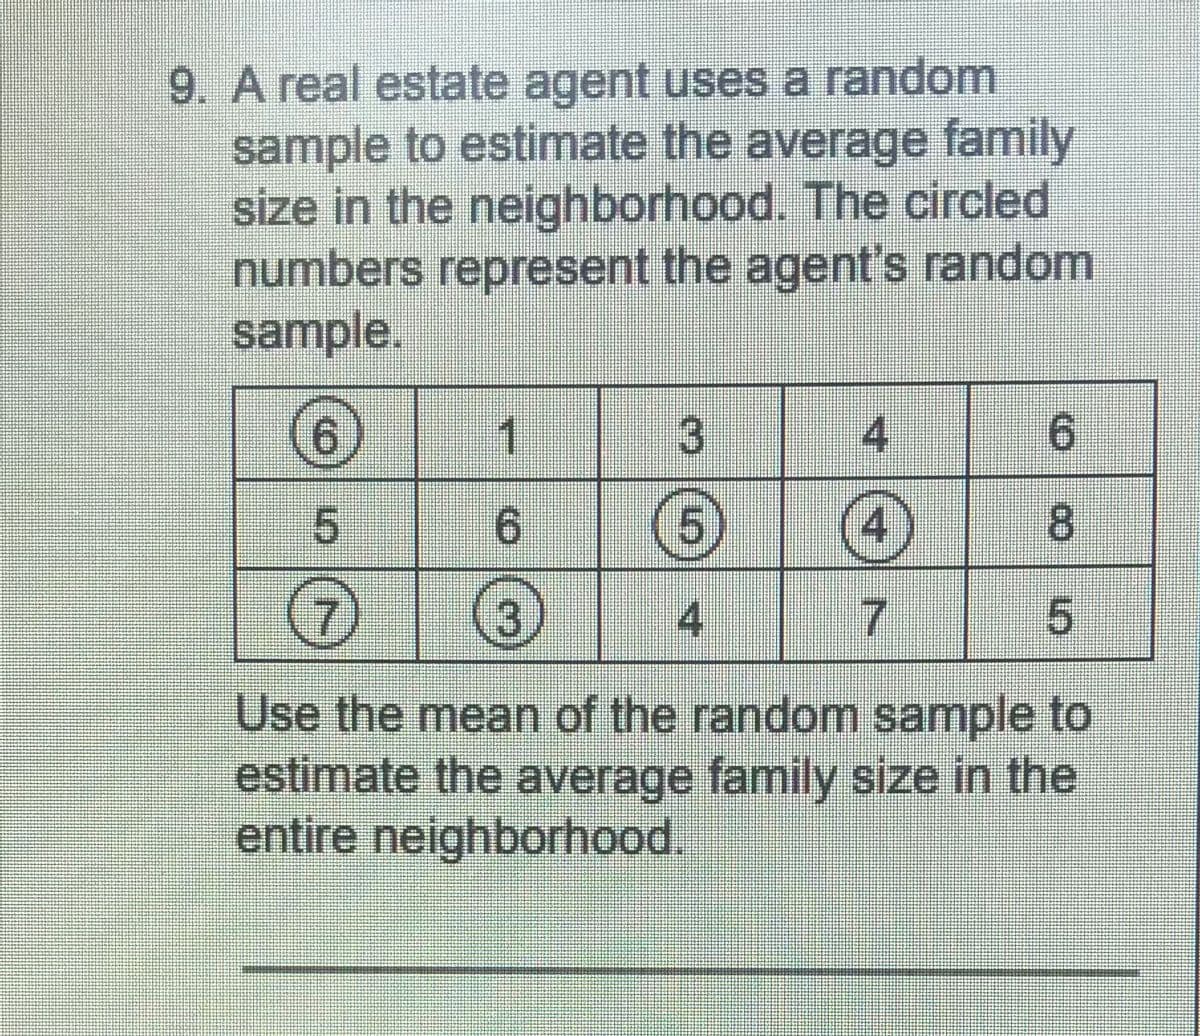 9. A real estate agent uses a random
sample to estimate the average family
size in the neighborhood. The circled
numbers represent the agent's random
sample.
6.
1.
4
6.
6 6
4
8.
4
7
Use the mean of the random sample to
estimate the average family size in the
entire neighborhood.
3.
4.
